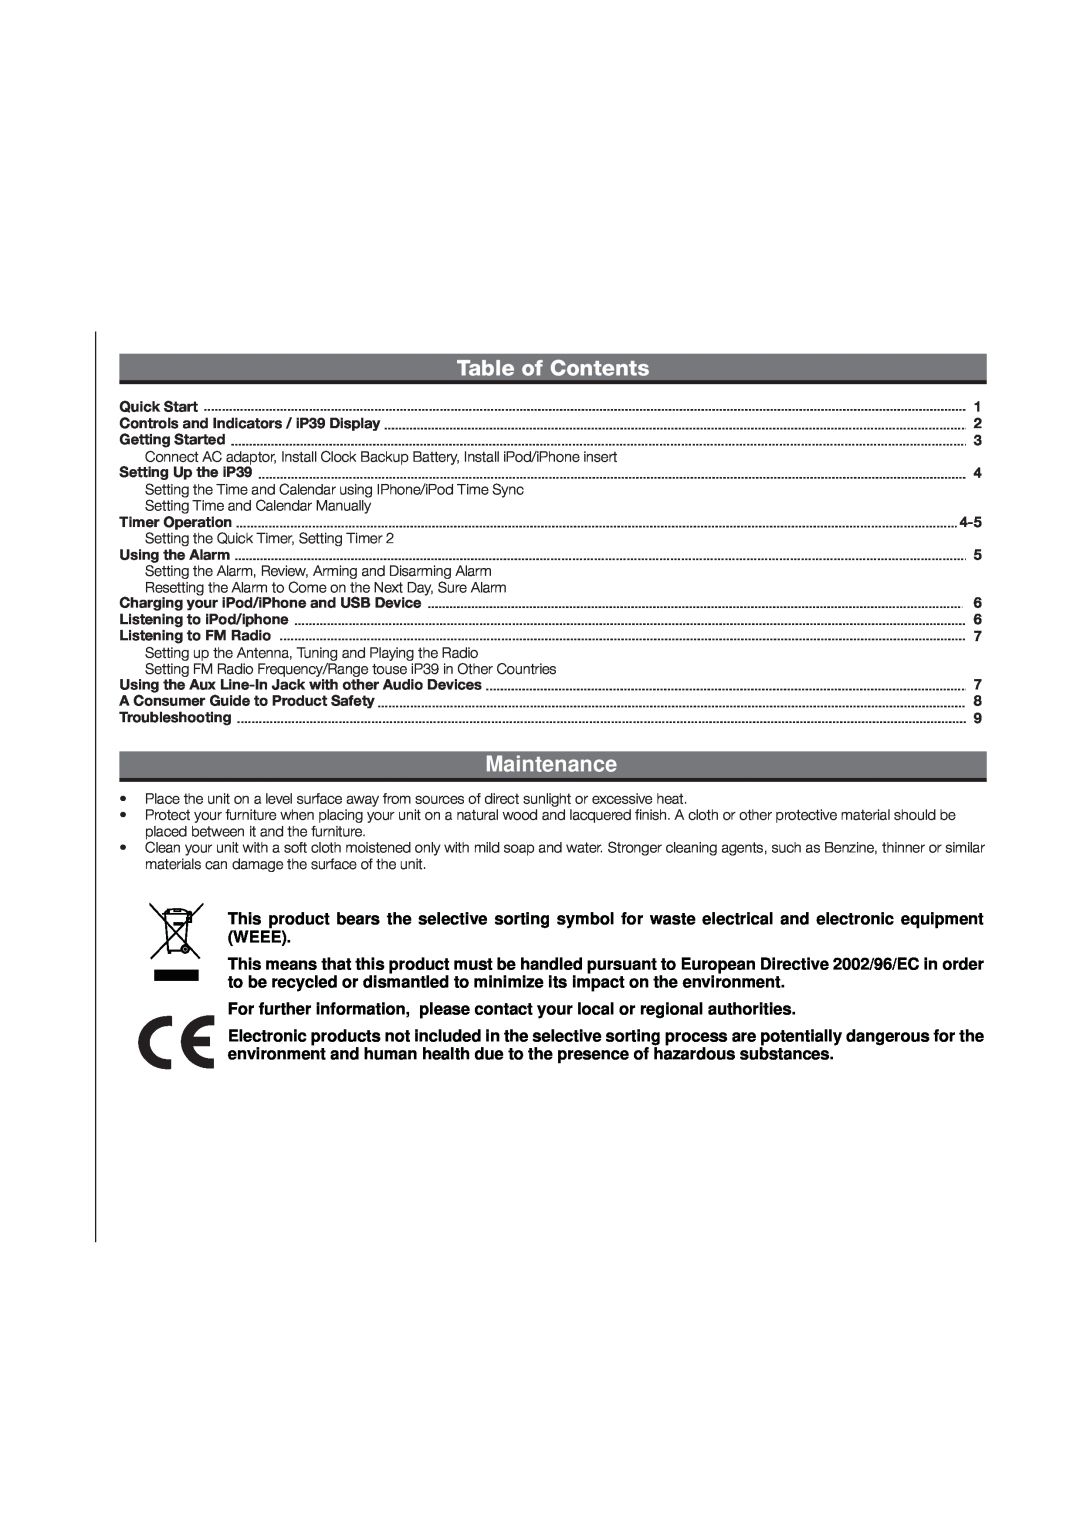 iHome IP39 manual Table of Contents, Maintenance 